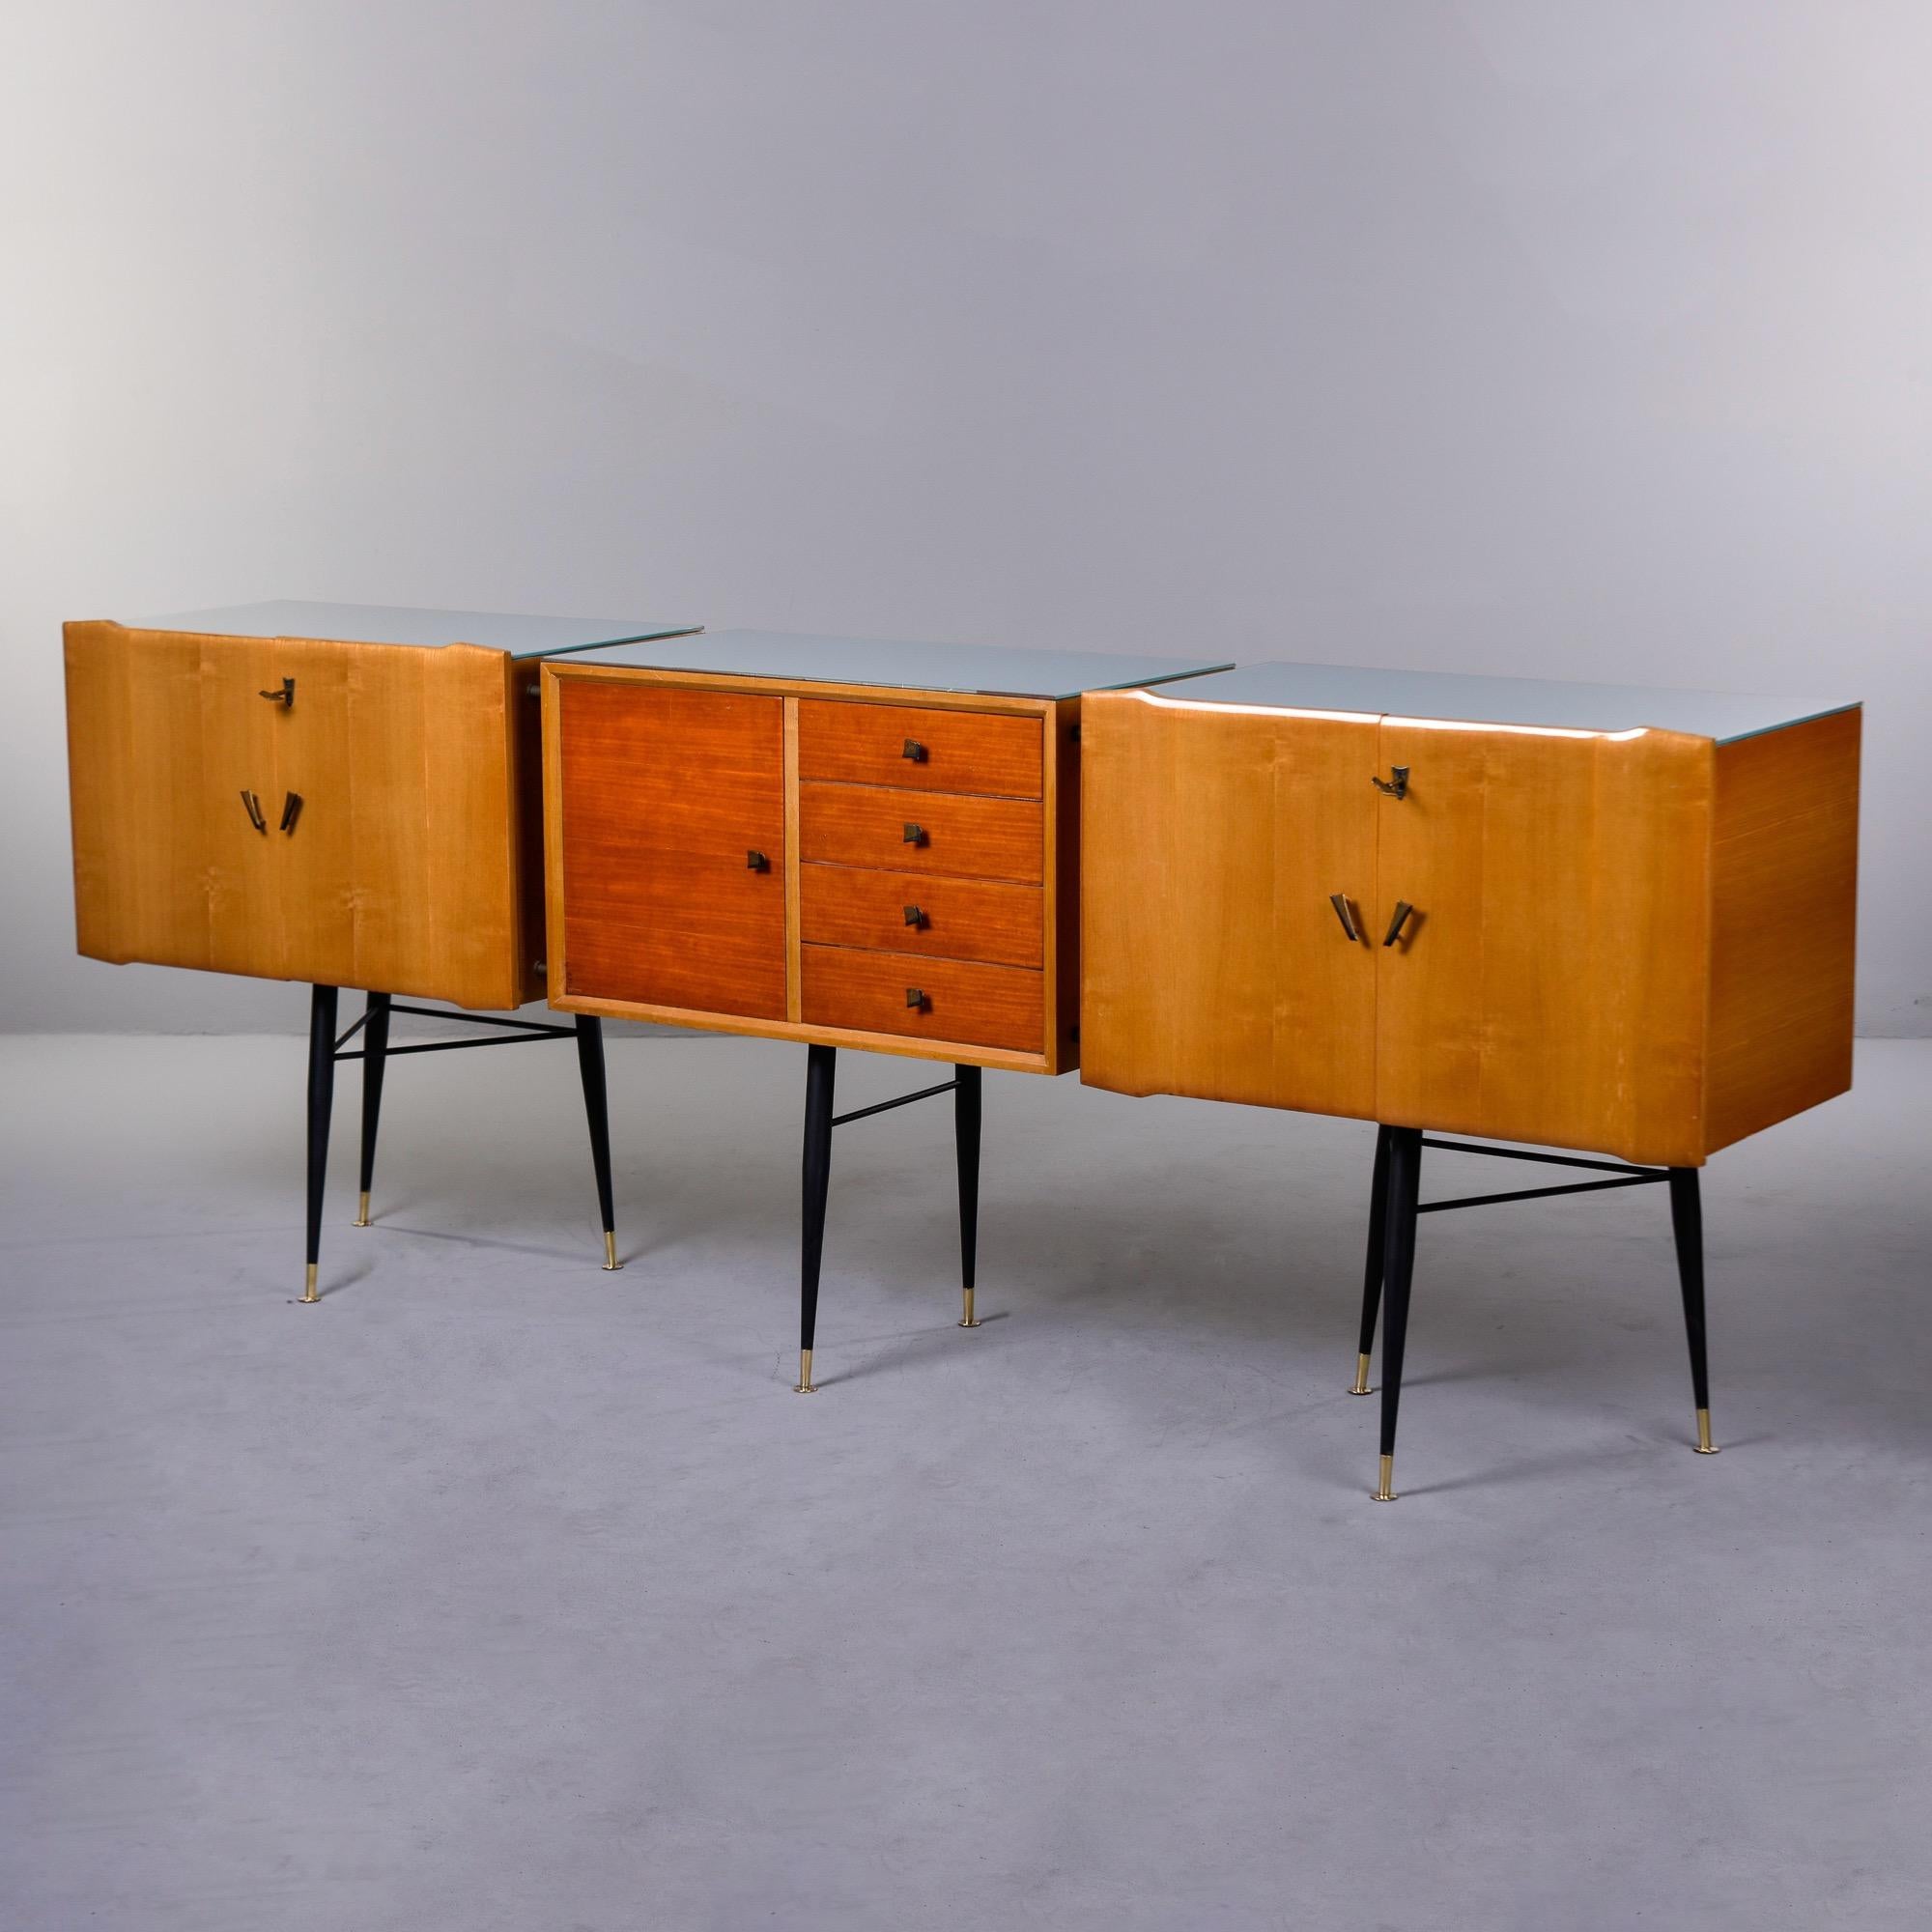 Found in Italy, this three segment buffet dates from the late 1950s. Two blonde cabinet sections flank a center bank of four drawers and small cabinet in a contrasting stain. The black metal base has eight tapered legs with brass feet and each